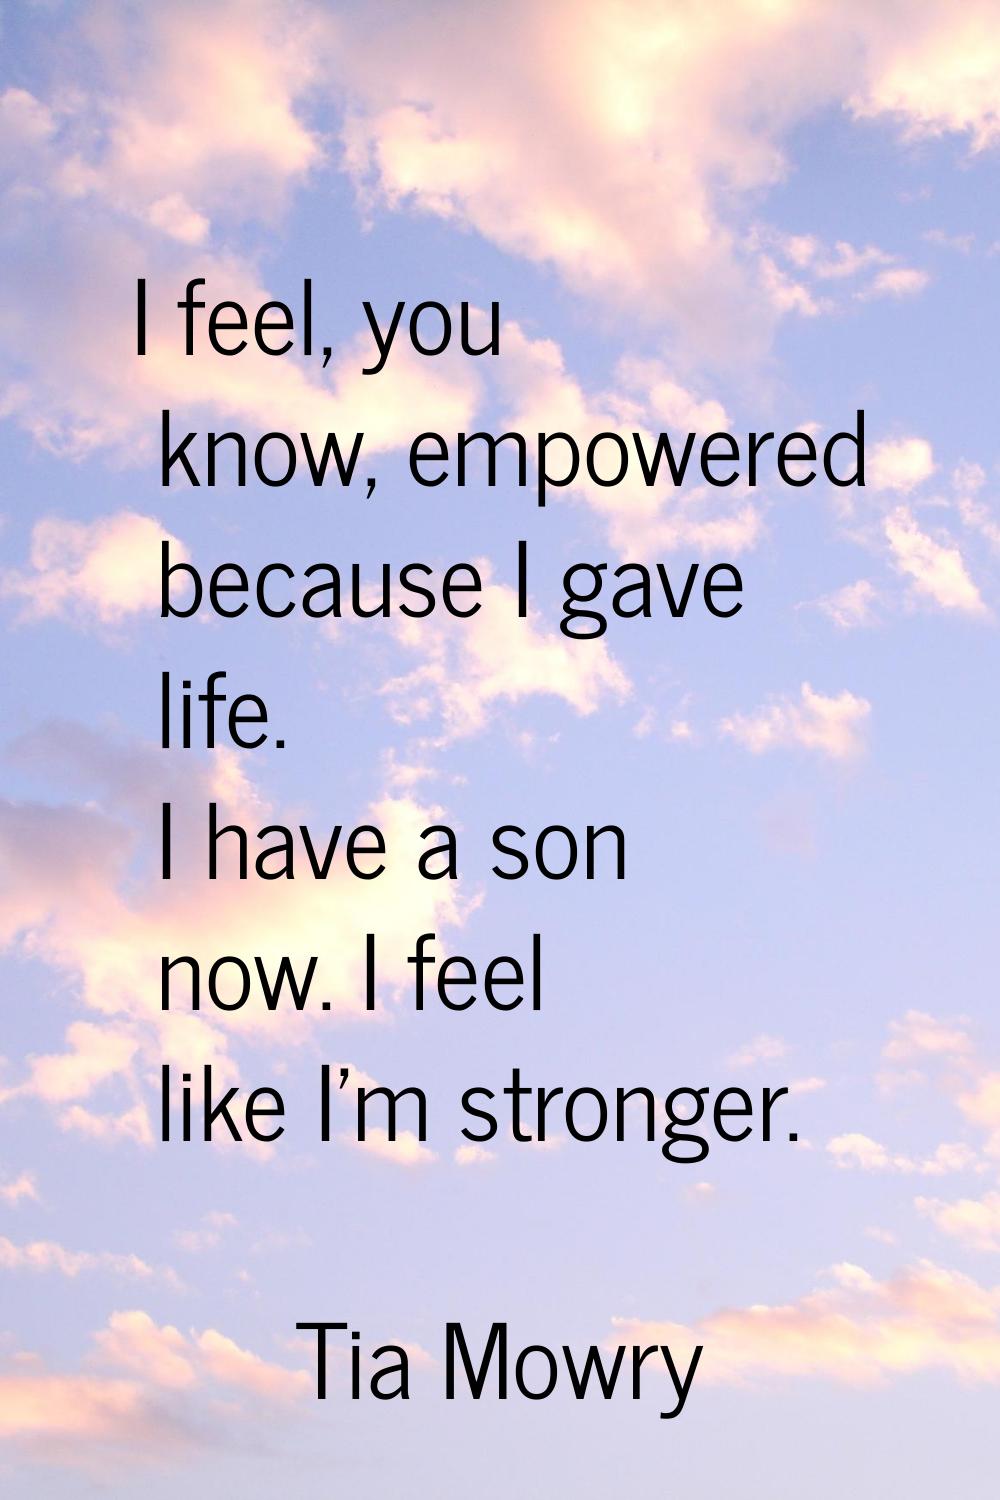 I feel, you know, empowered because I gave life. I have a son now. I feel like I'm stronger.